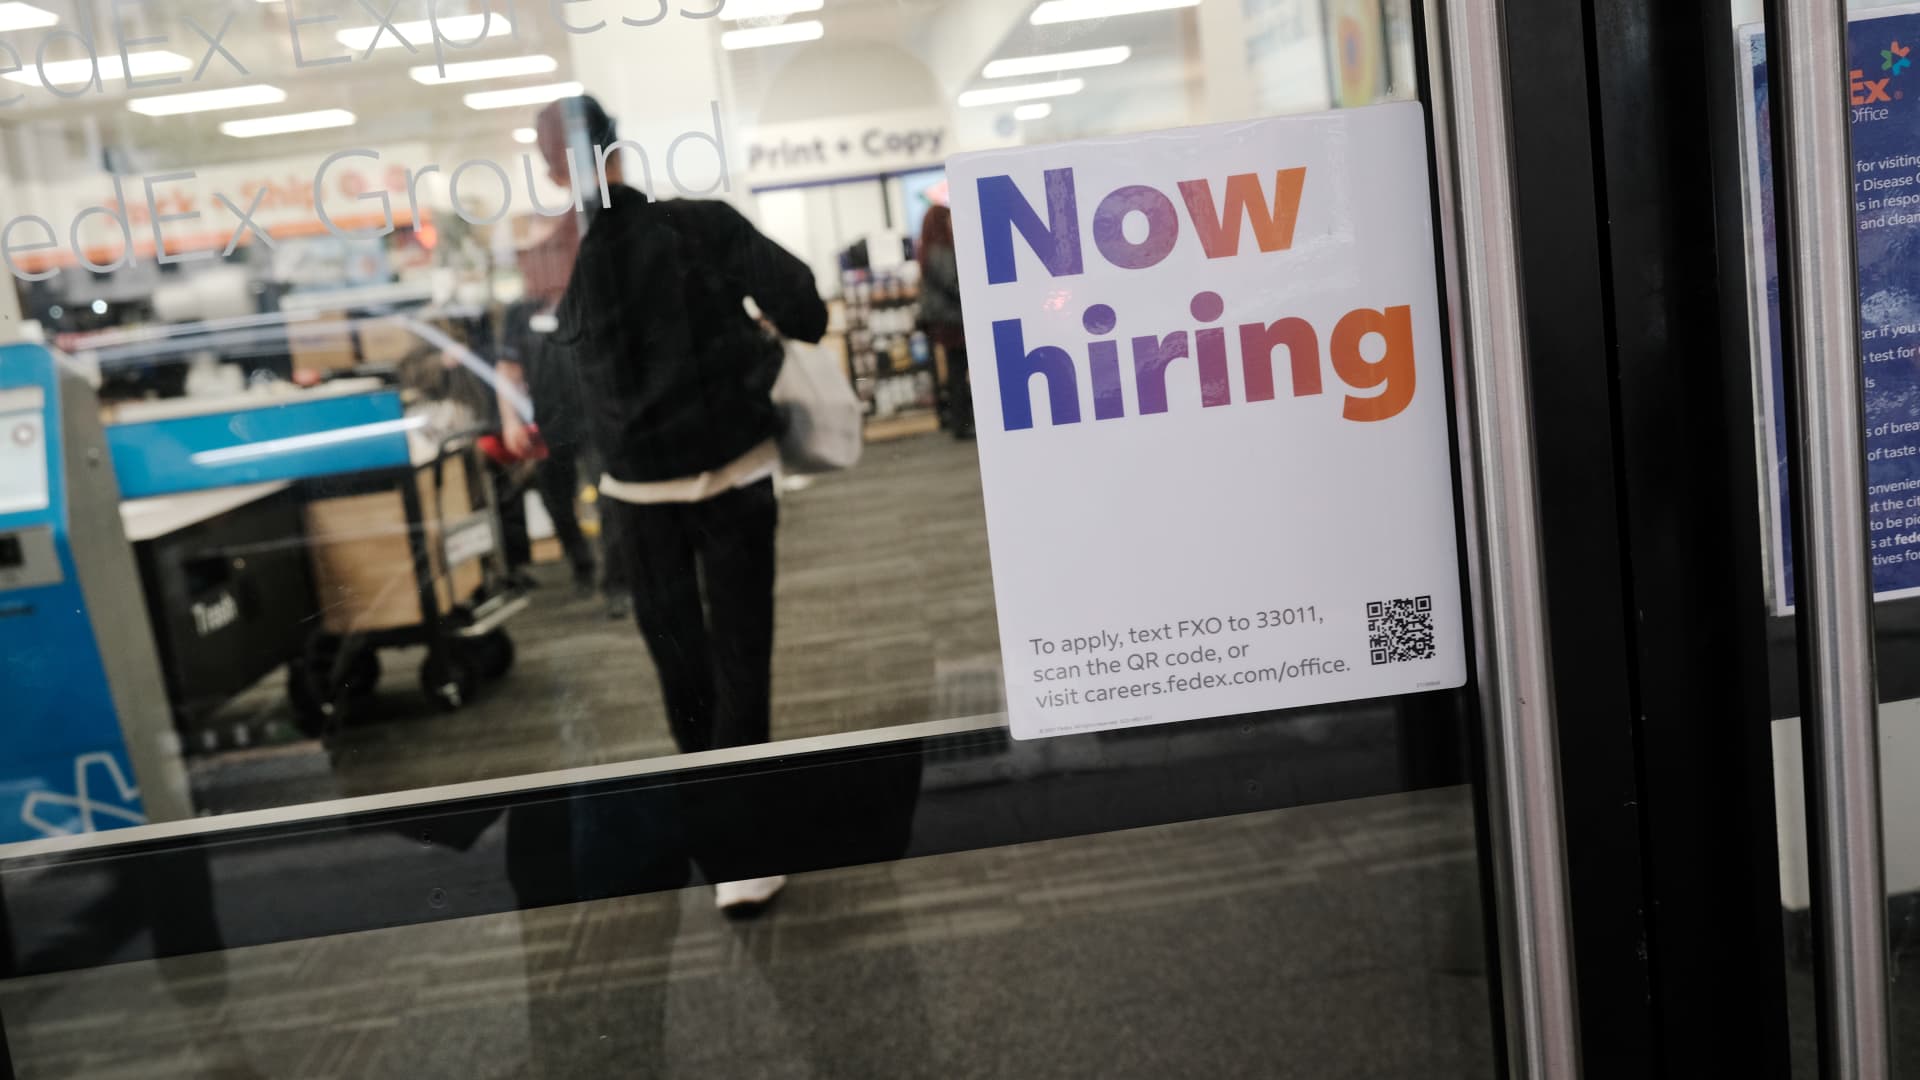 Private payrolls increased by just 128,000 in May, the slowest growth of the recovery, ADP says